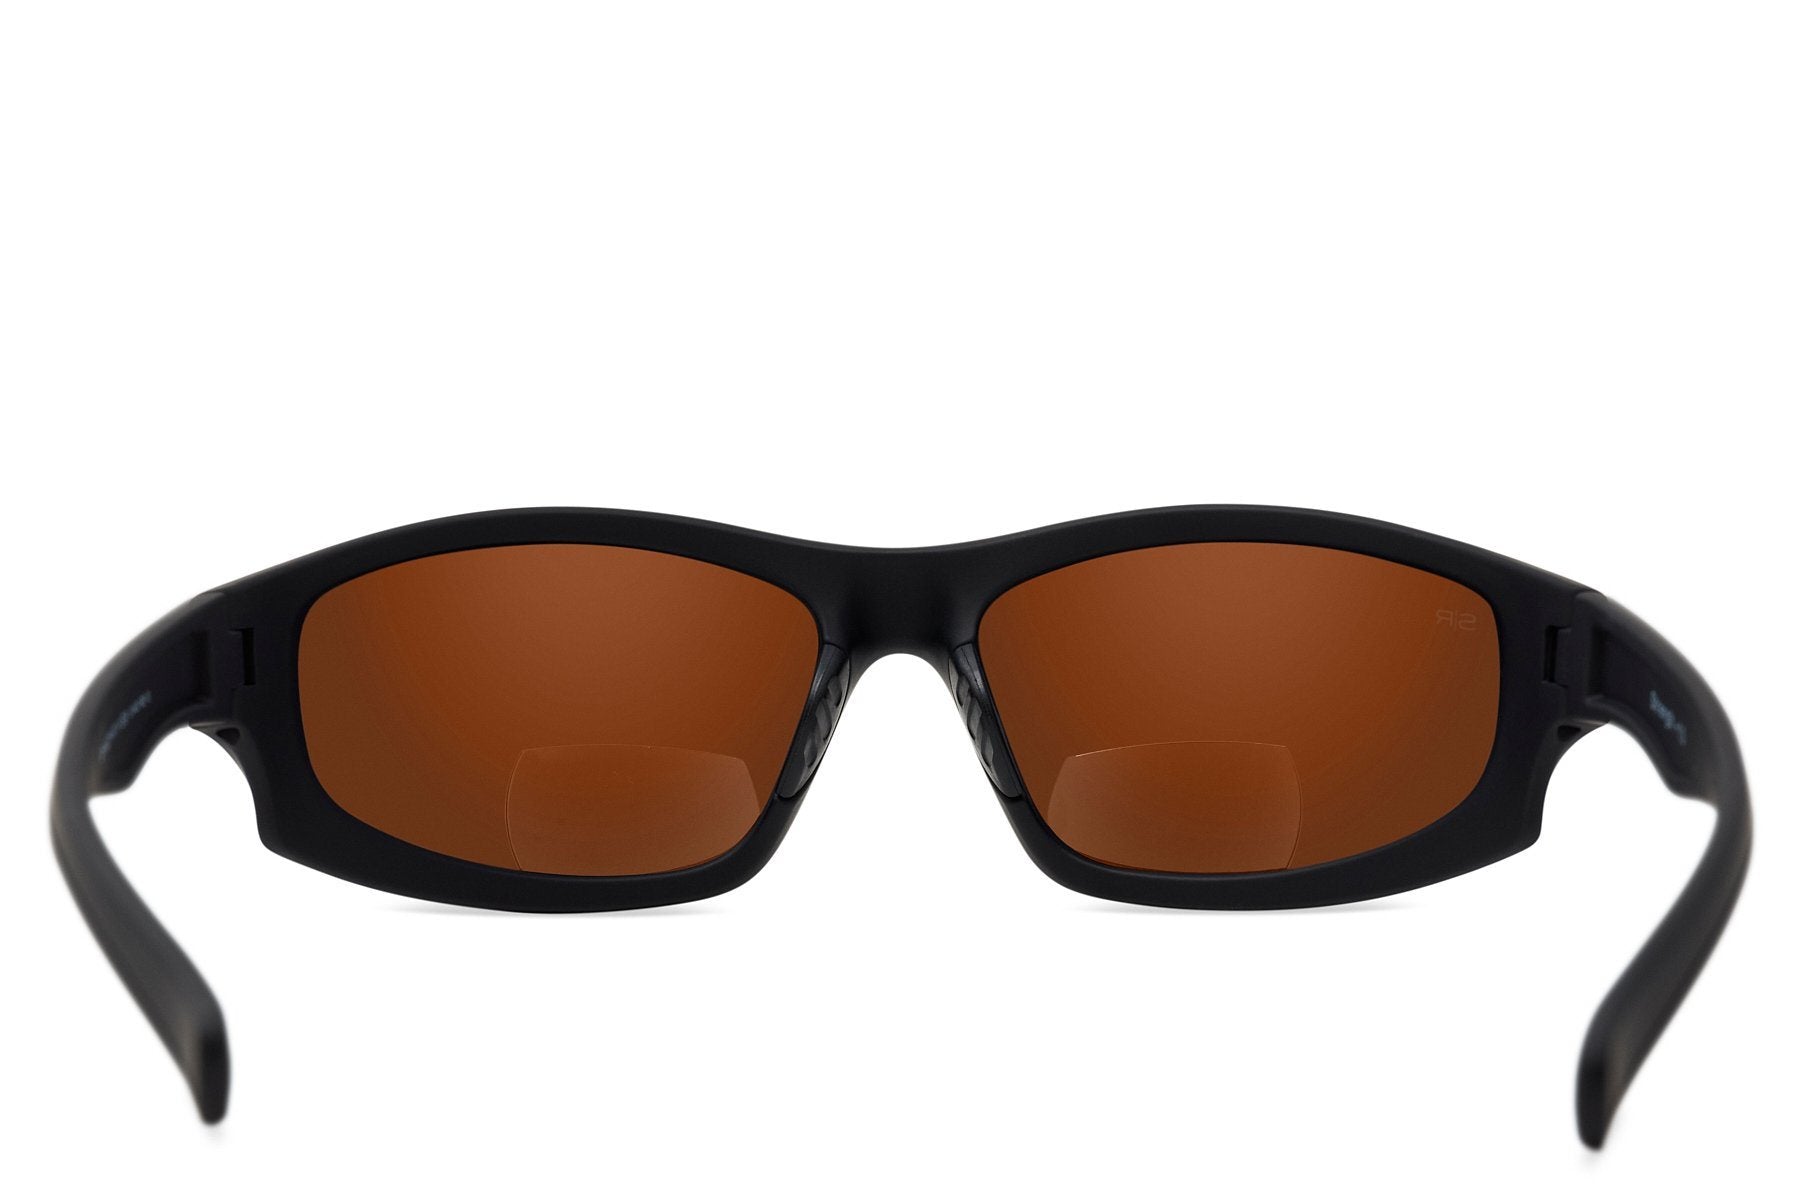 x Series Readers +1.5 - Black Glacier Sunglasses | Matte Black Sunglasses | Best Christmas Gifts | Gifts for The Holidays | Unique Gifts for Friends